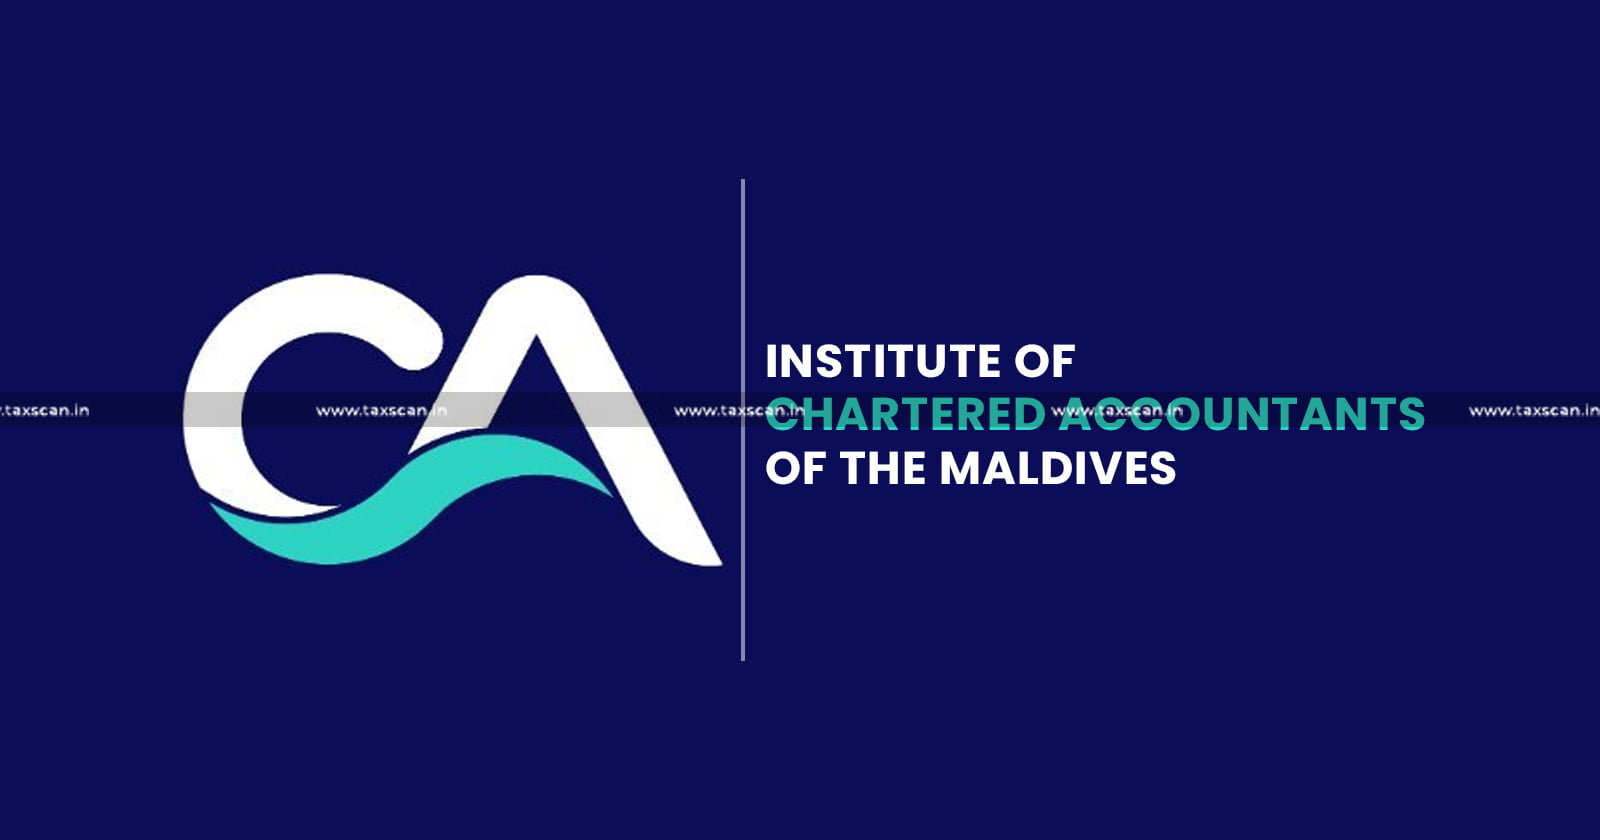 Union Cabinet approves signing of MoU - Chartered Accountants - Chartered Accountants of Maldives - taxscan